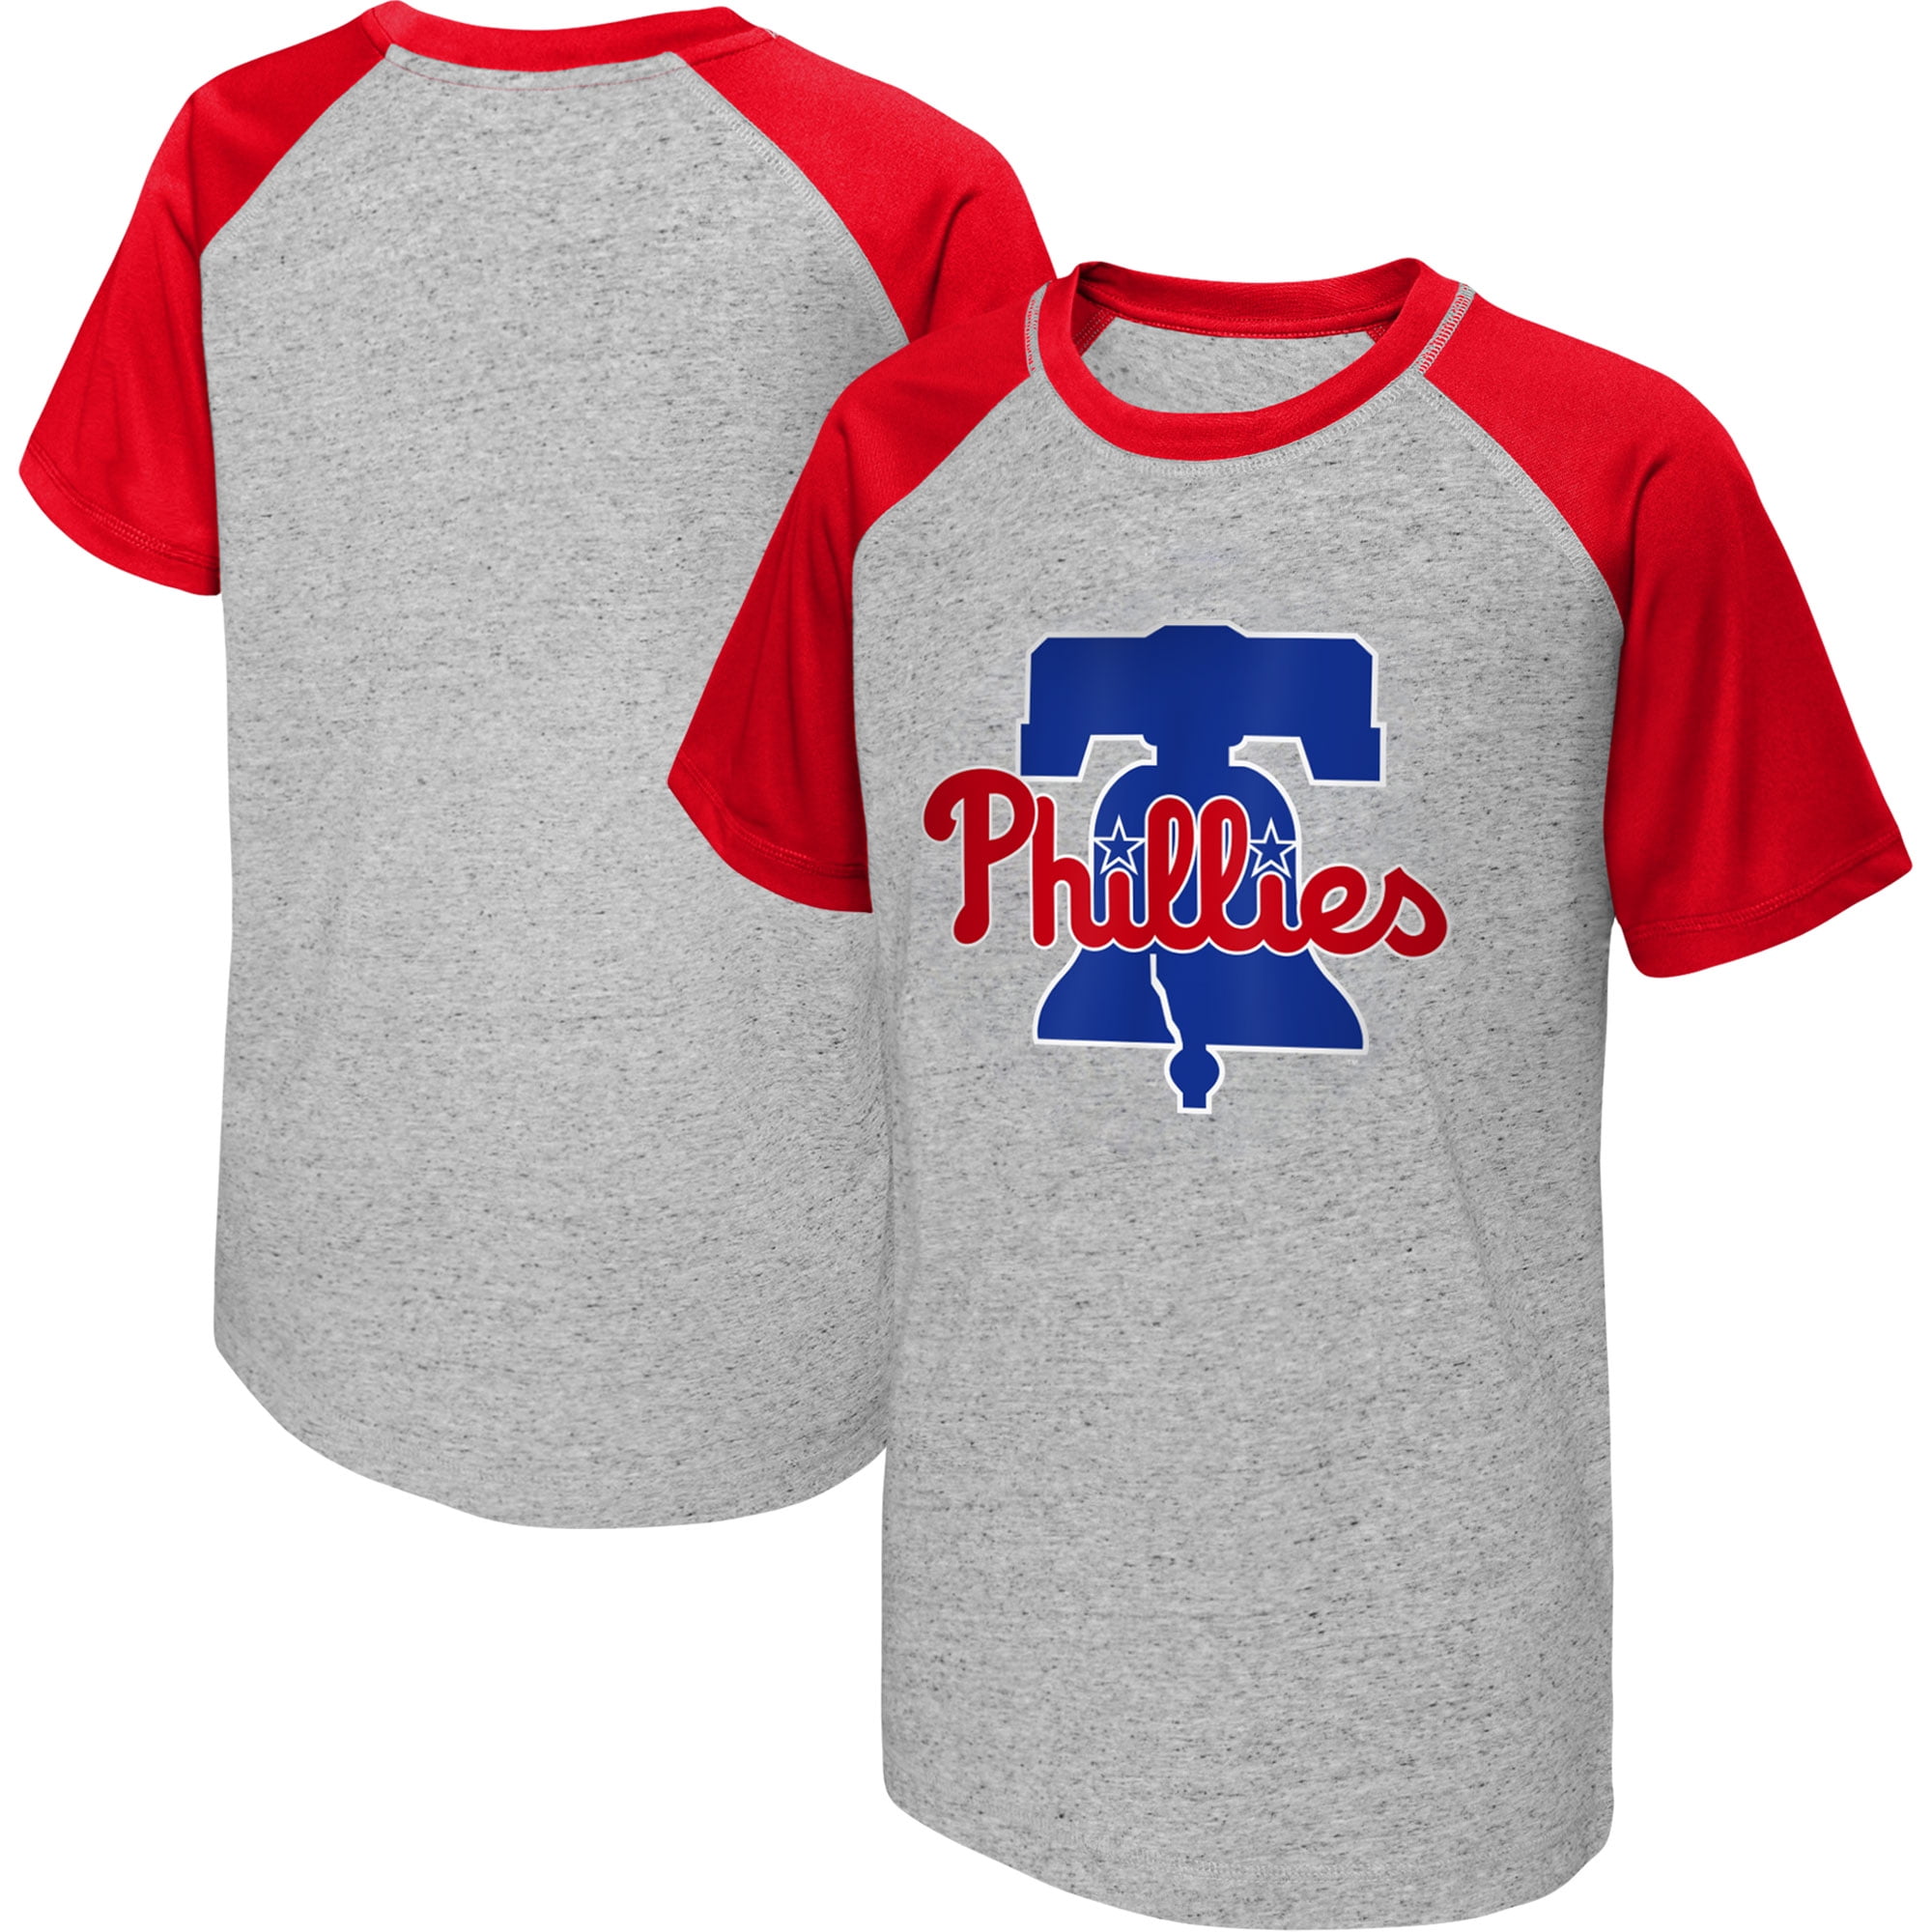 Youth MLB Productions Heather Gray Philadelphia Phillies MBSG T